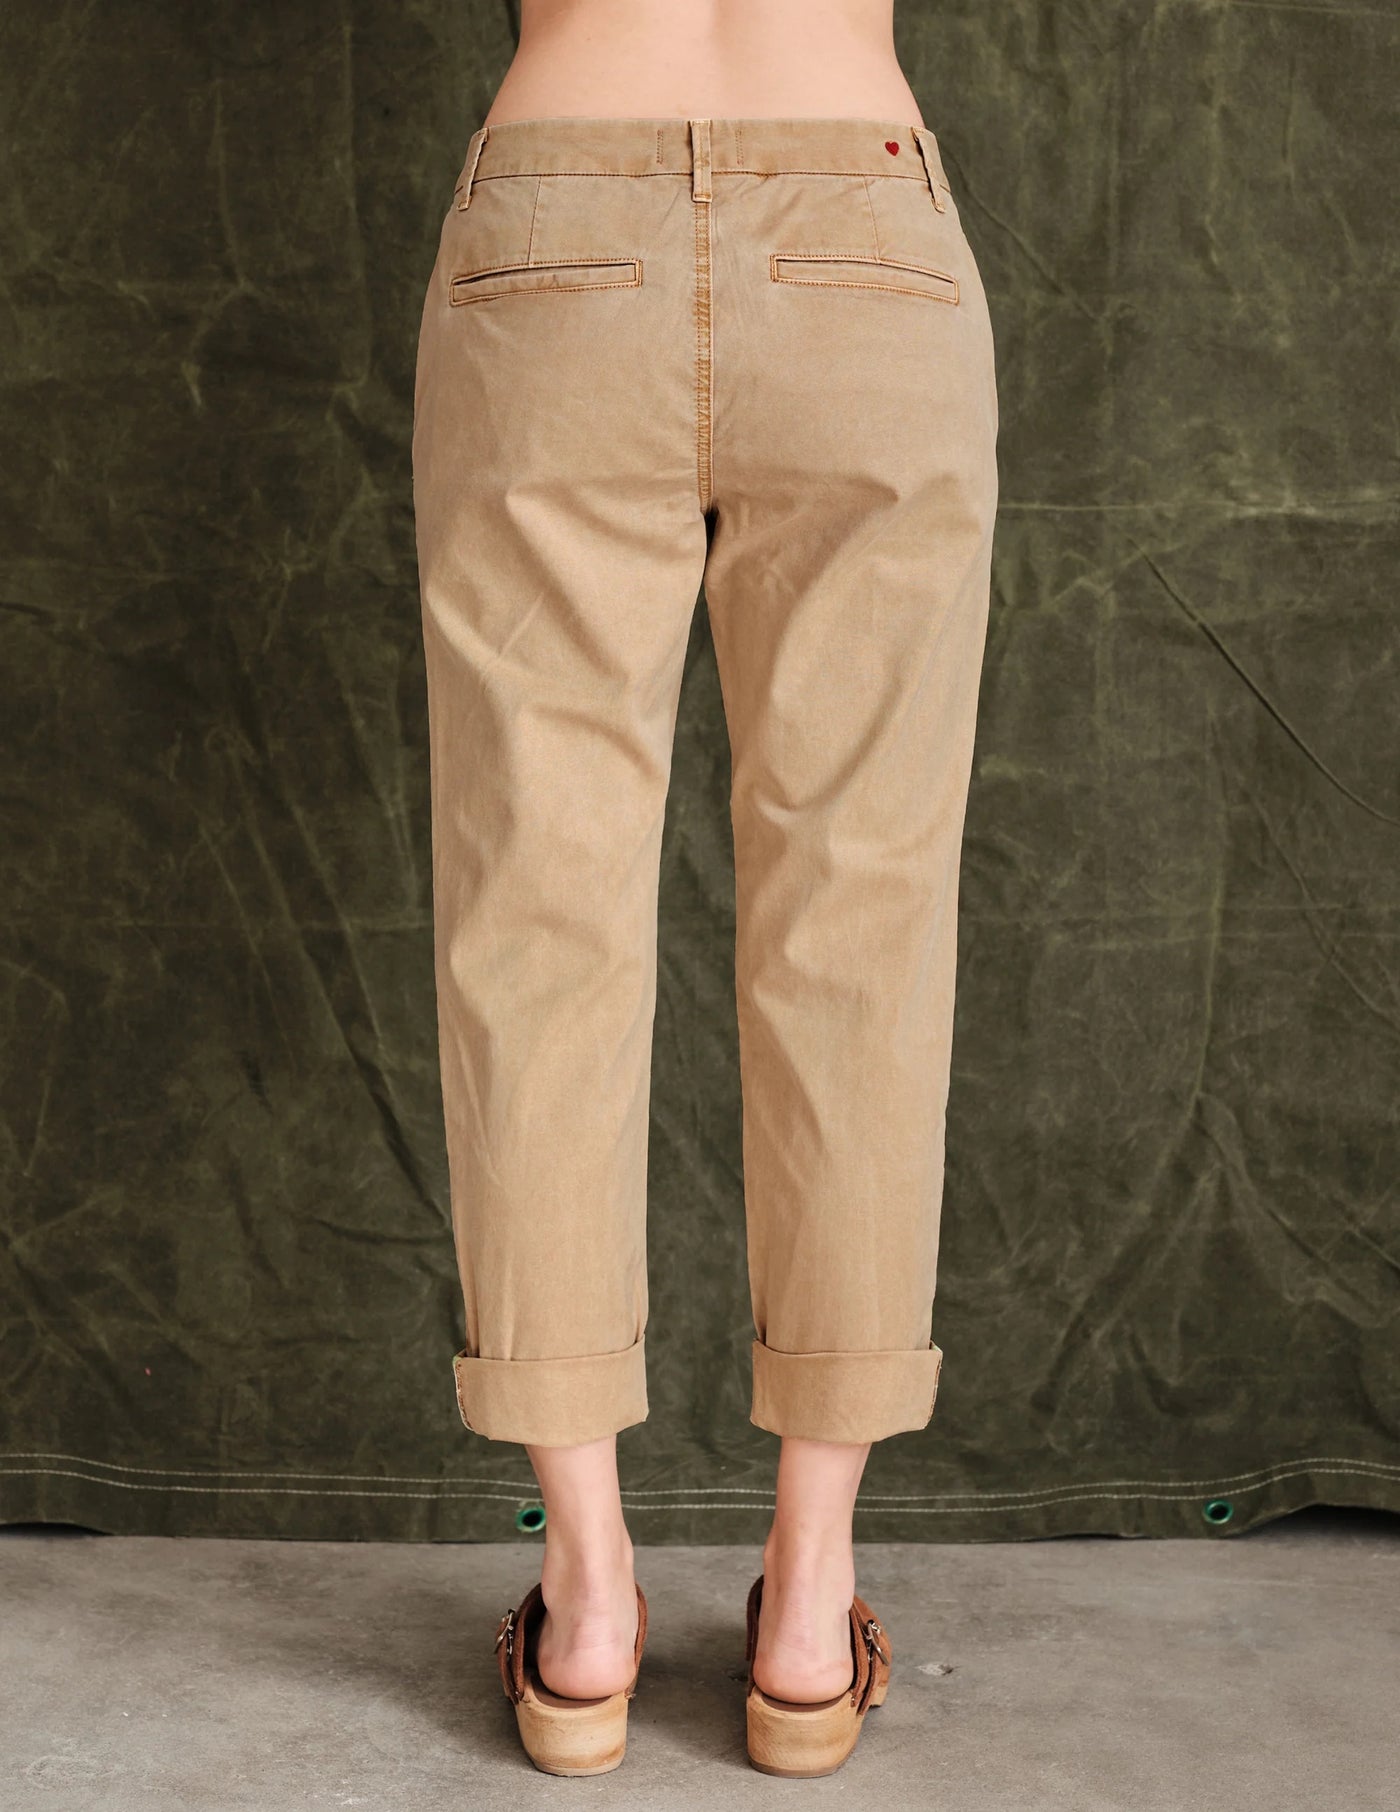 Sundry Rollup Trouser with Trim in Pigment Teak